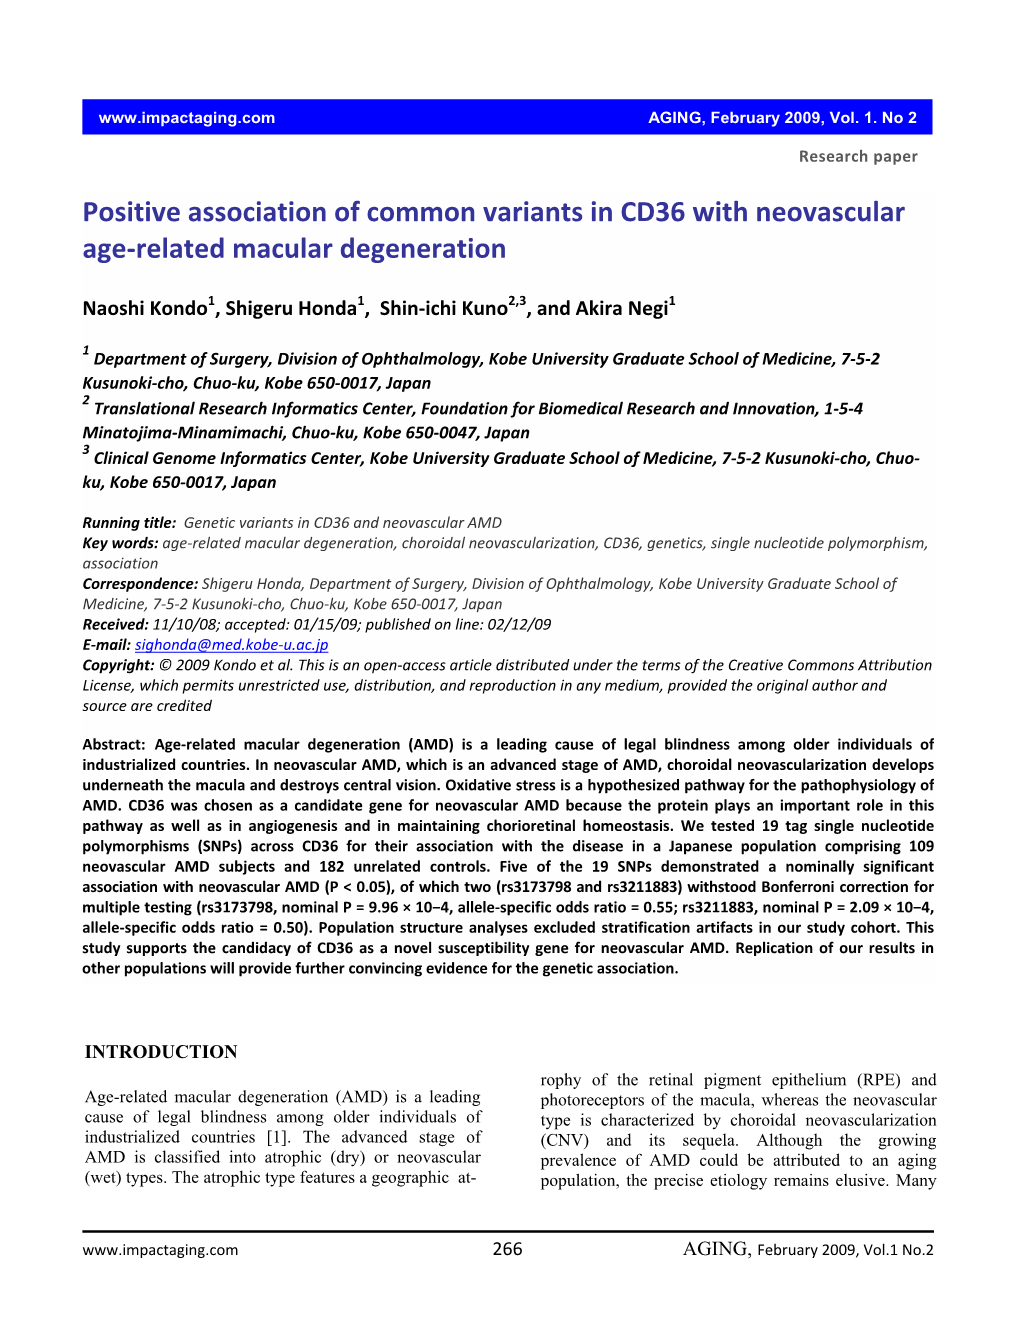 Positive Association of Common Variants in CD36 with Neovascular Age-Related Macular Degeneration